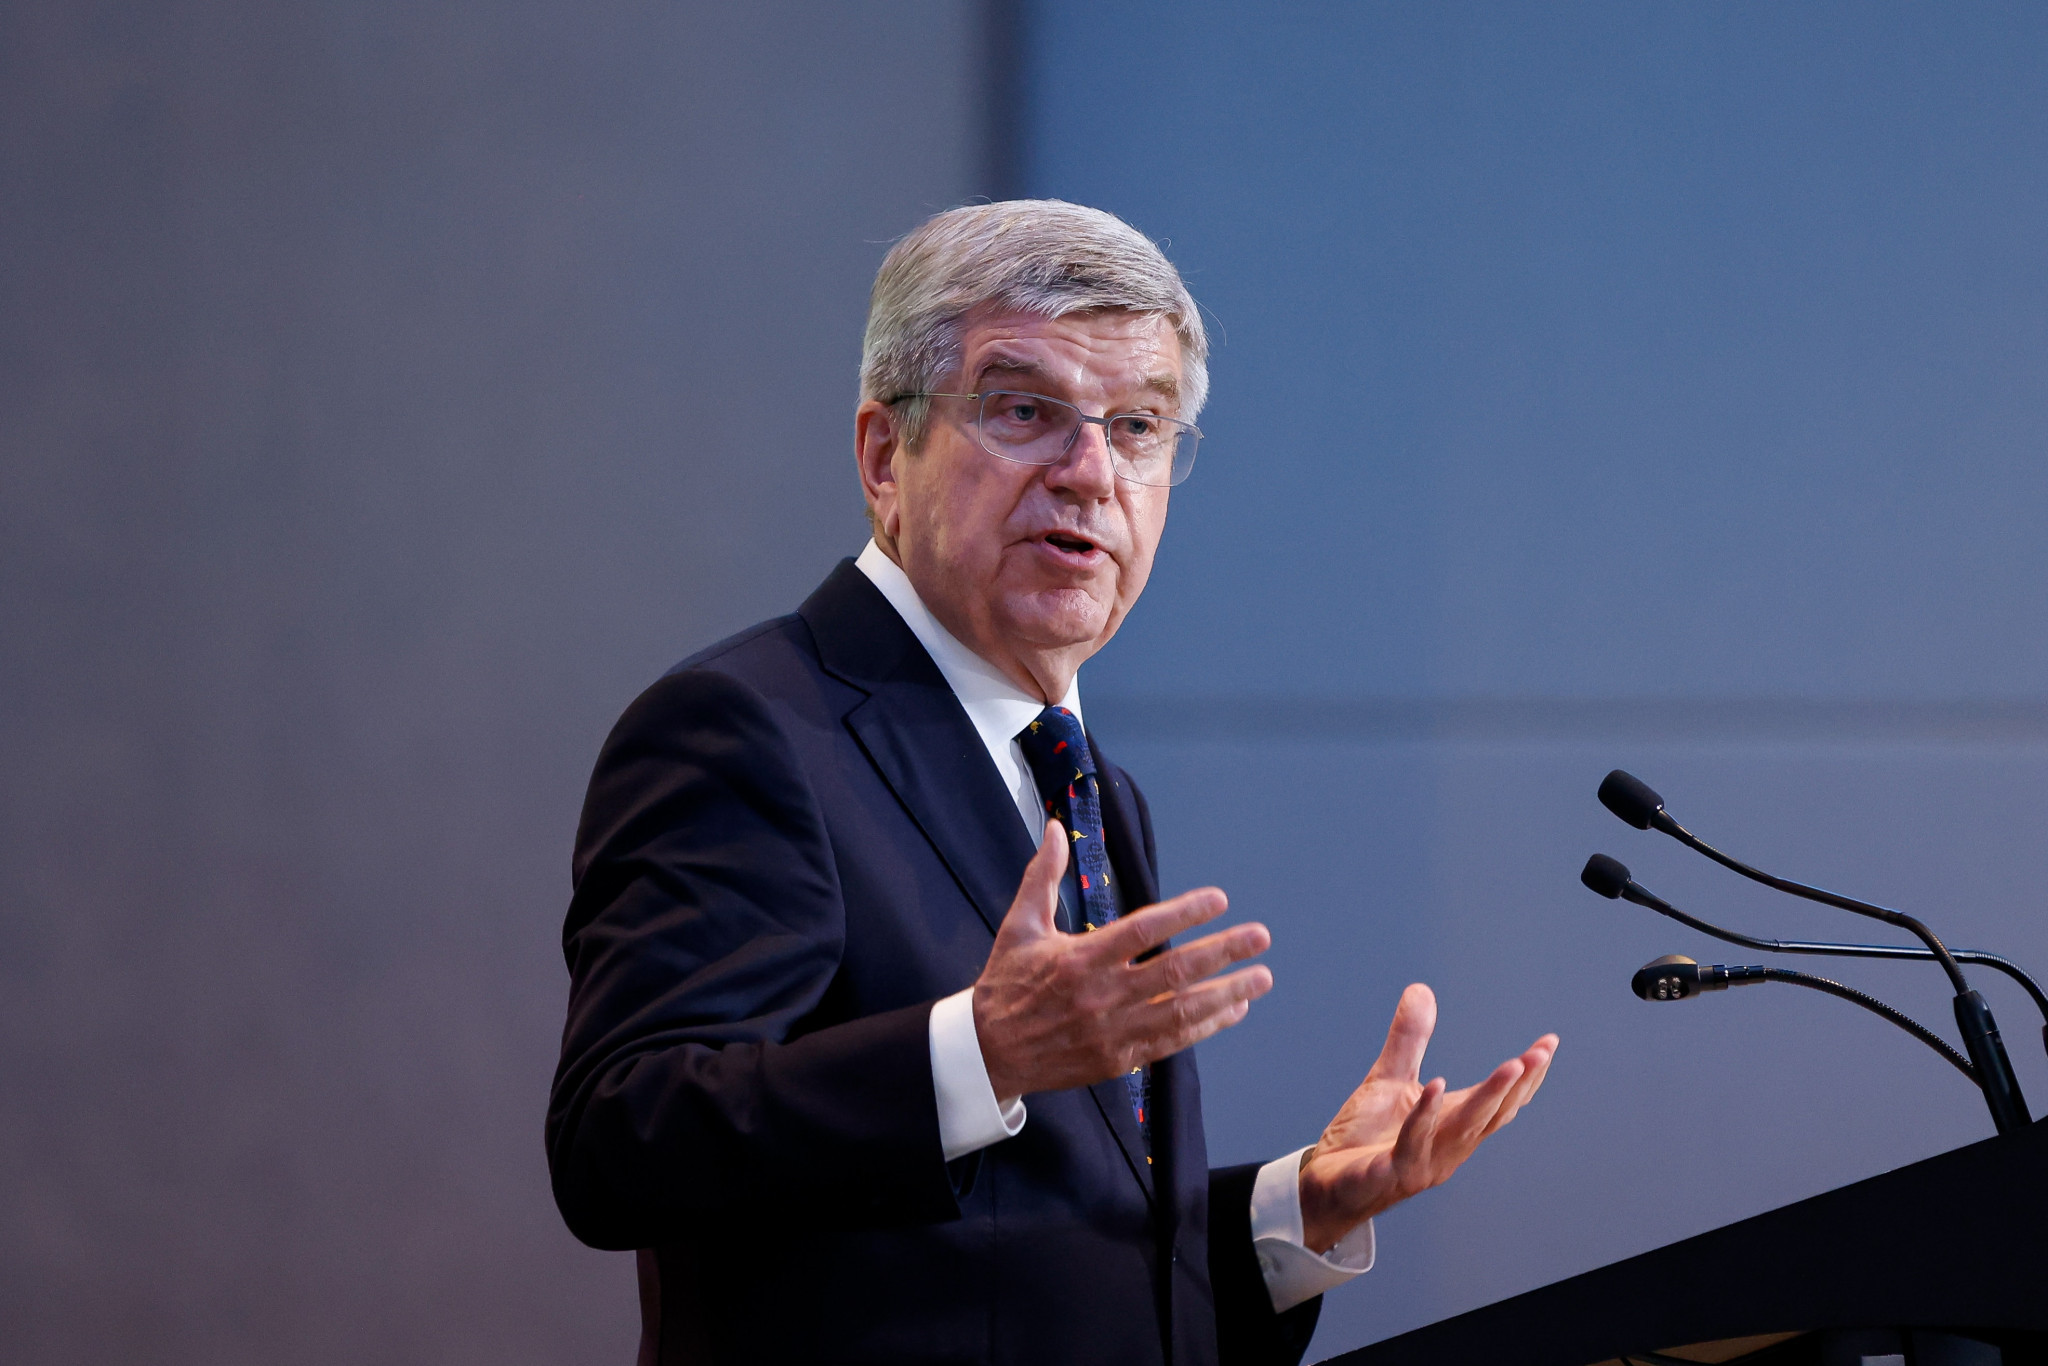 IOC President Thomas Bach said that a double award of the 2030 and 2034 Winter Olympics "would not be the right thing to do" ©Getty Images